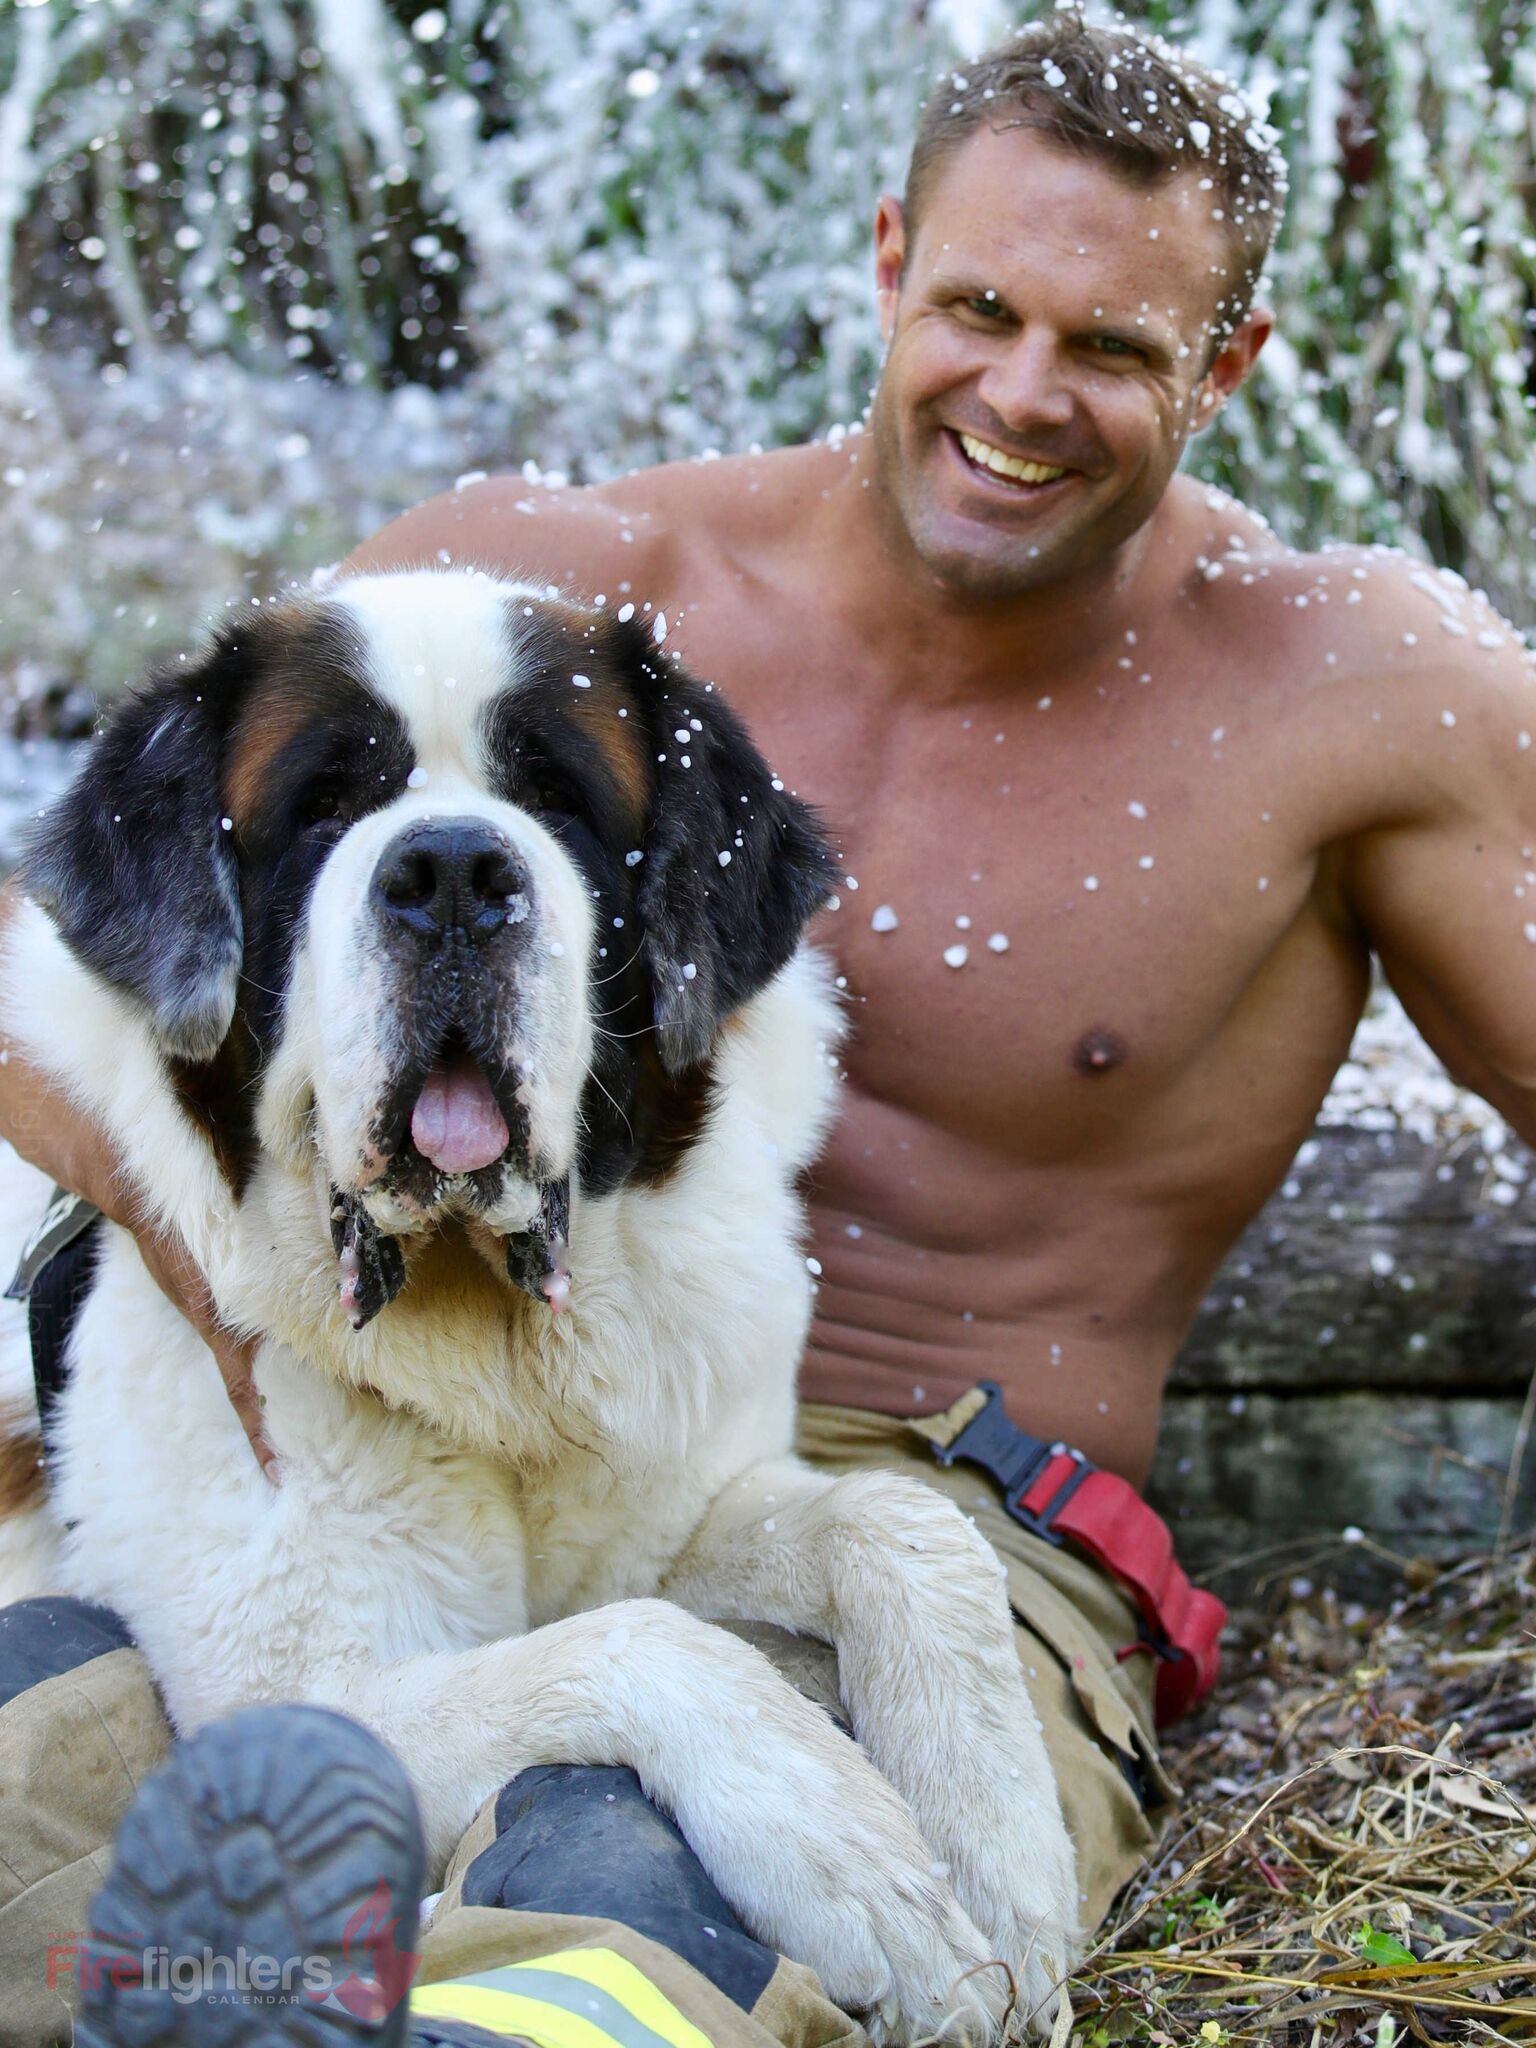 Hot Aussie Firefighters Posing with Animals for Charity Is the Sexiest